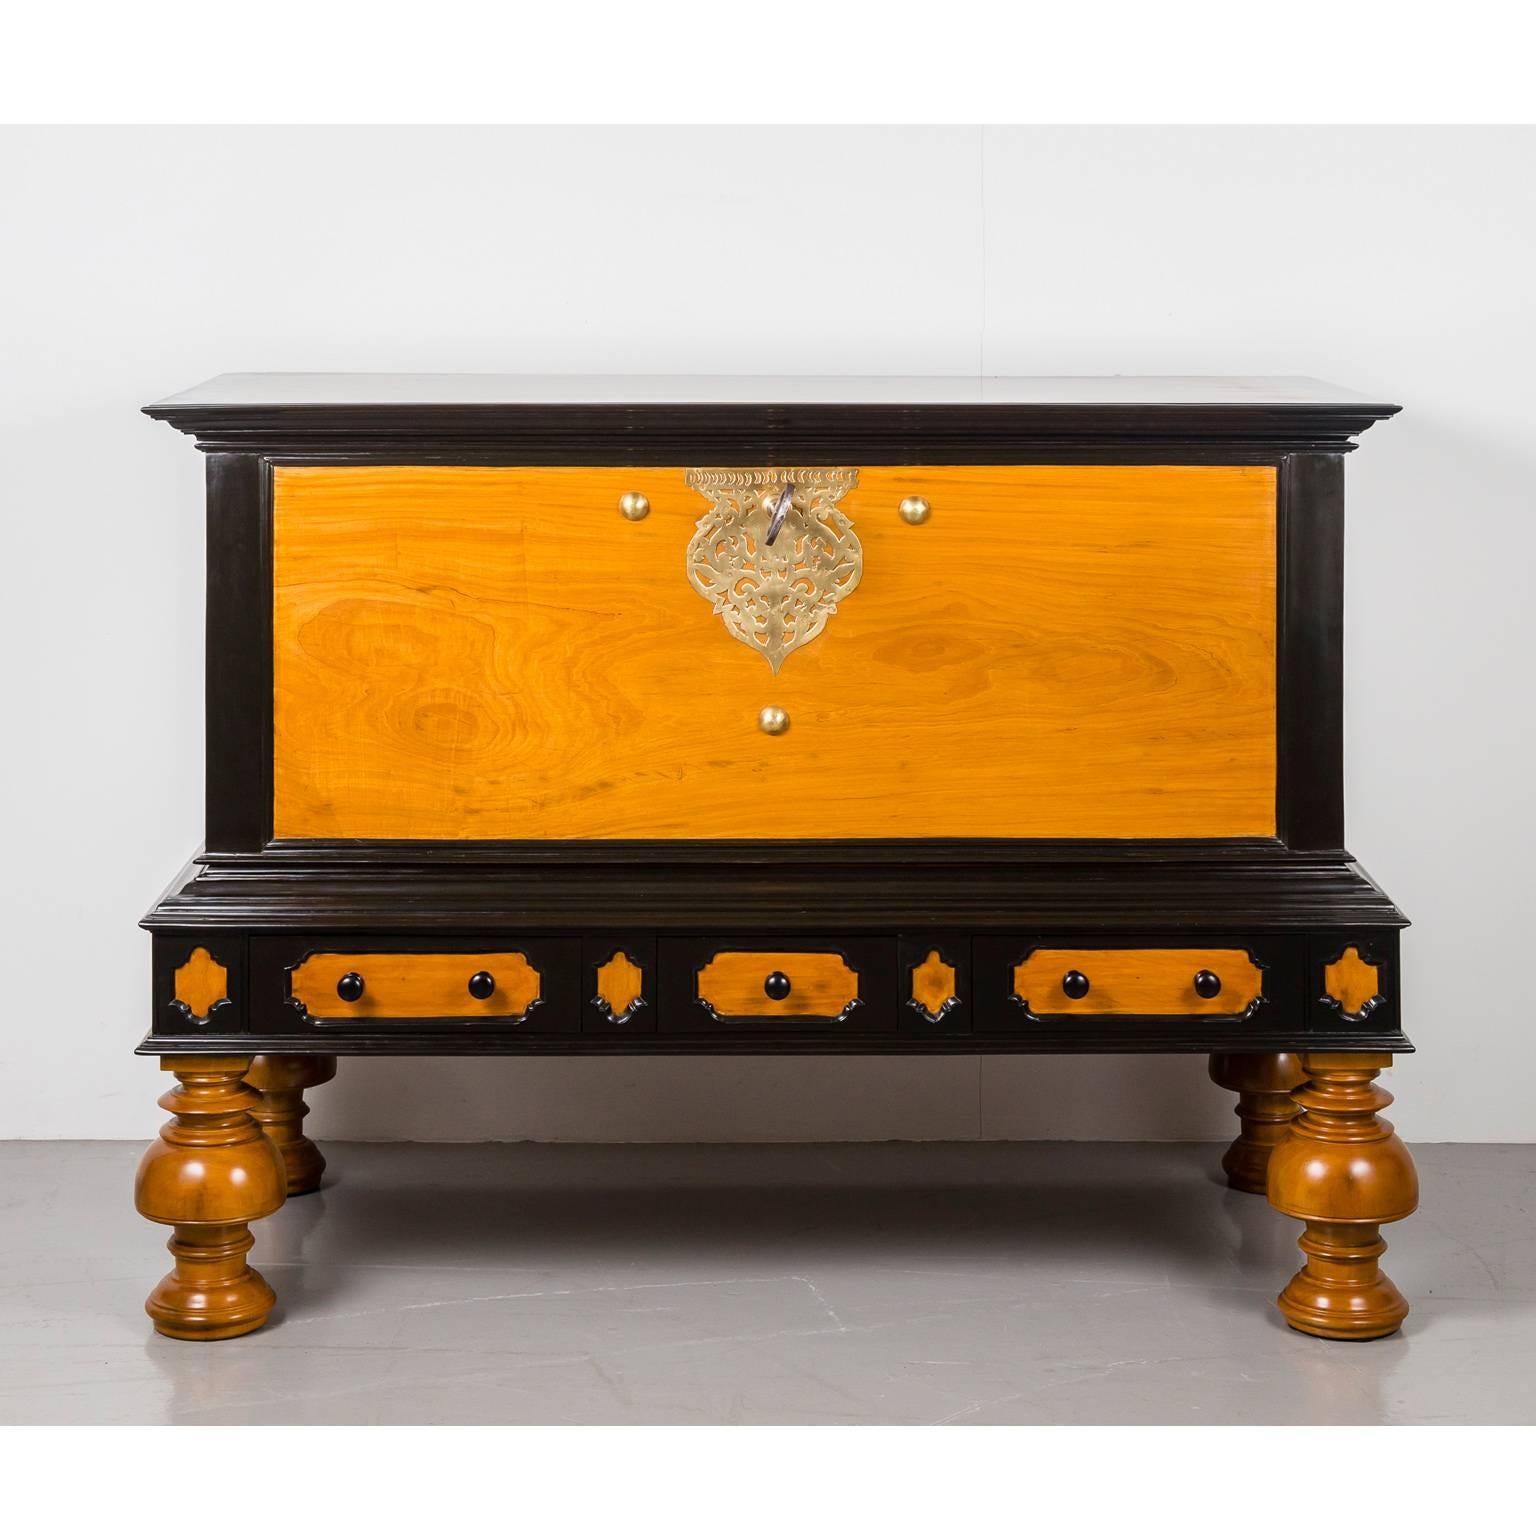 A stunning, large Dutch colonial storage chest of solid plank construction in satinwood, the lid and panels surrounded by an ebony edge. 
The front features an elaborate pierced brass escutcheon with original lock and large key and is further